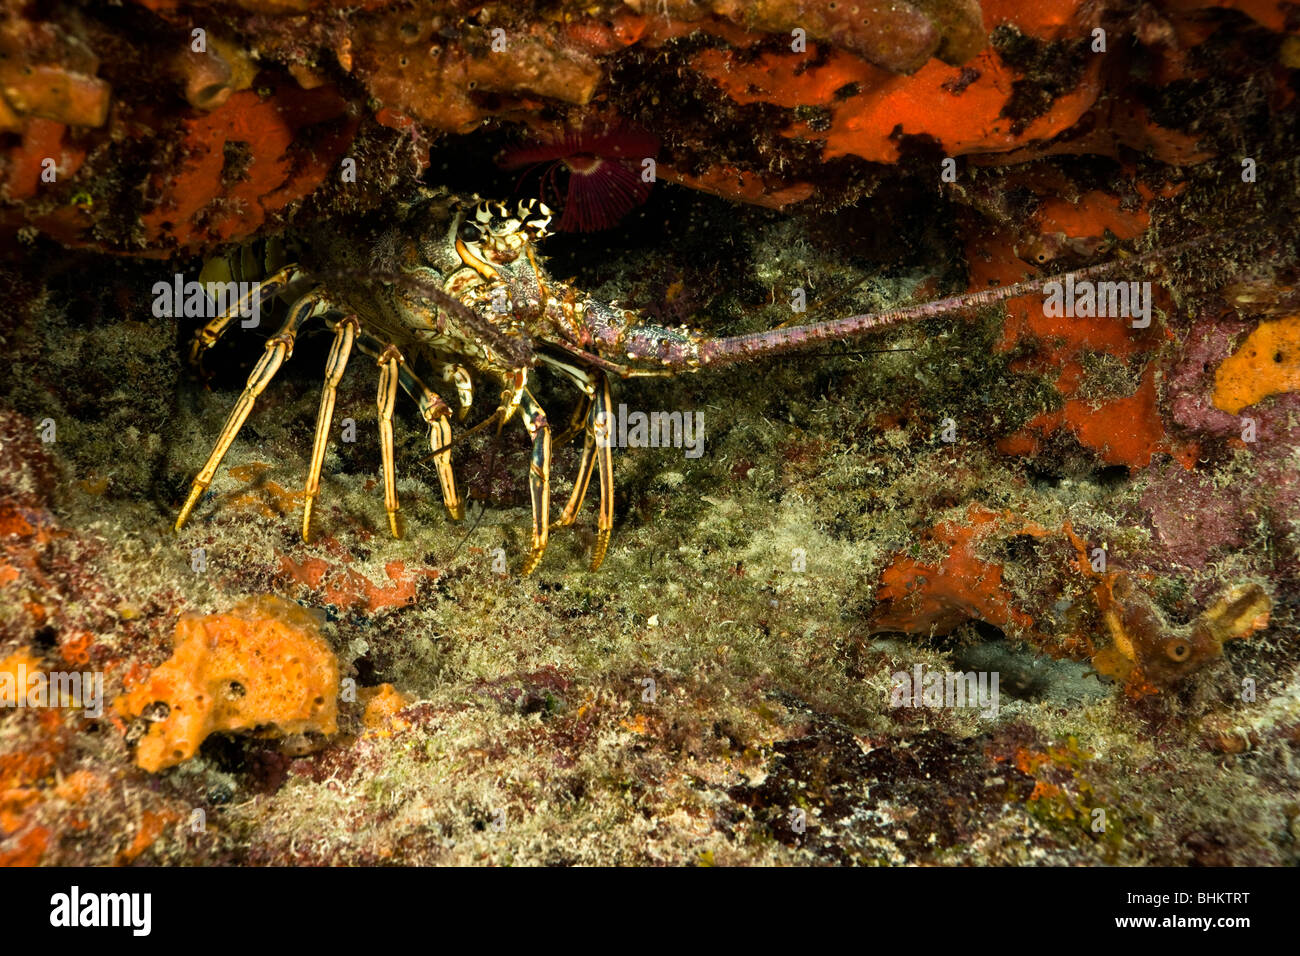 Caribbean Spiny Lobster under red sponge encrusted coral reef ledge surrounded by tiny fry fish underwater photograph John Pennekamp marine sanctuary Stock Photo